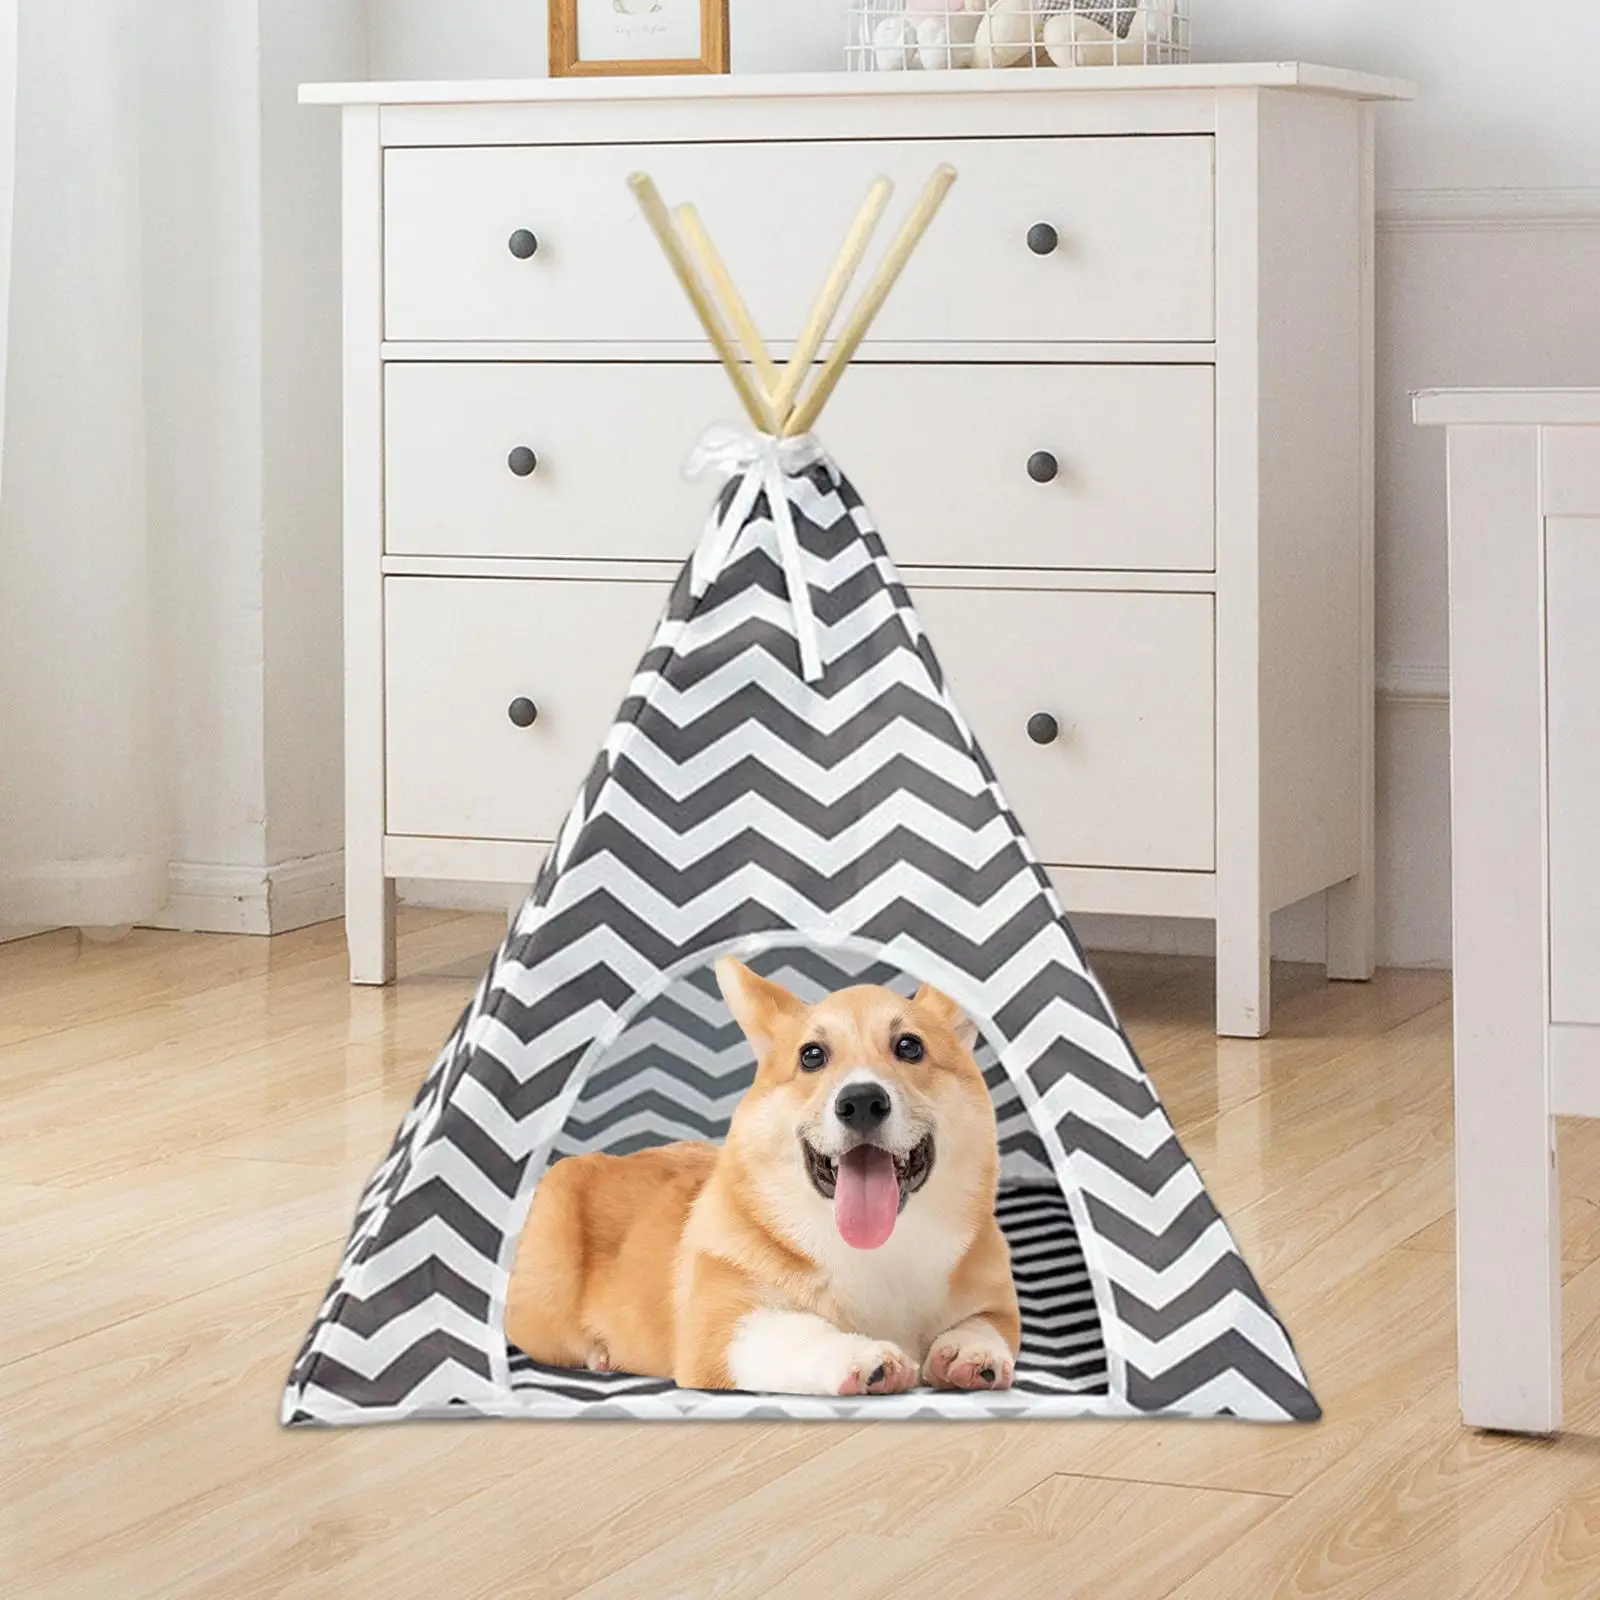 Portable Pet Teepee Dog House Cat Bed Tent Nest Cushion Shelter Mat Sleeping Bed Warm for Indoor Kitten Puppy Accessories